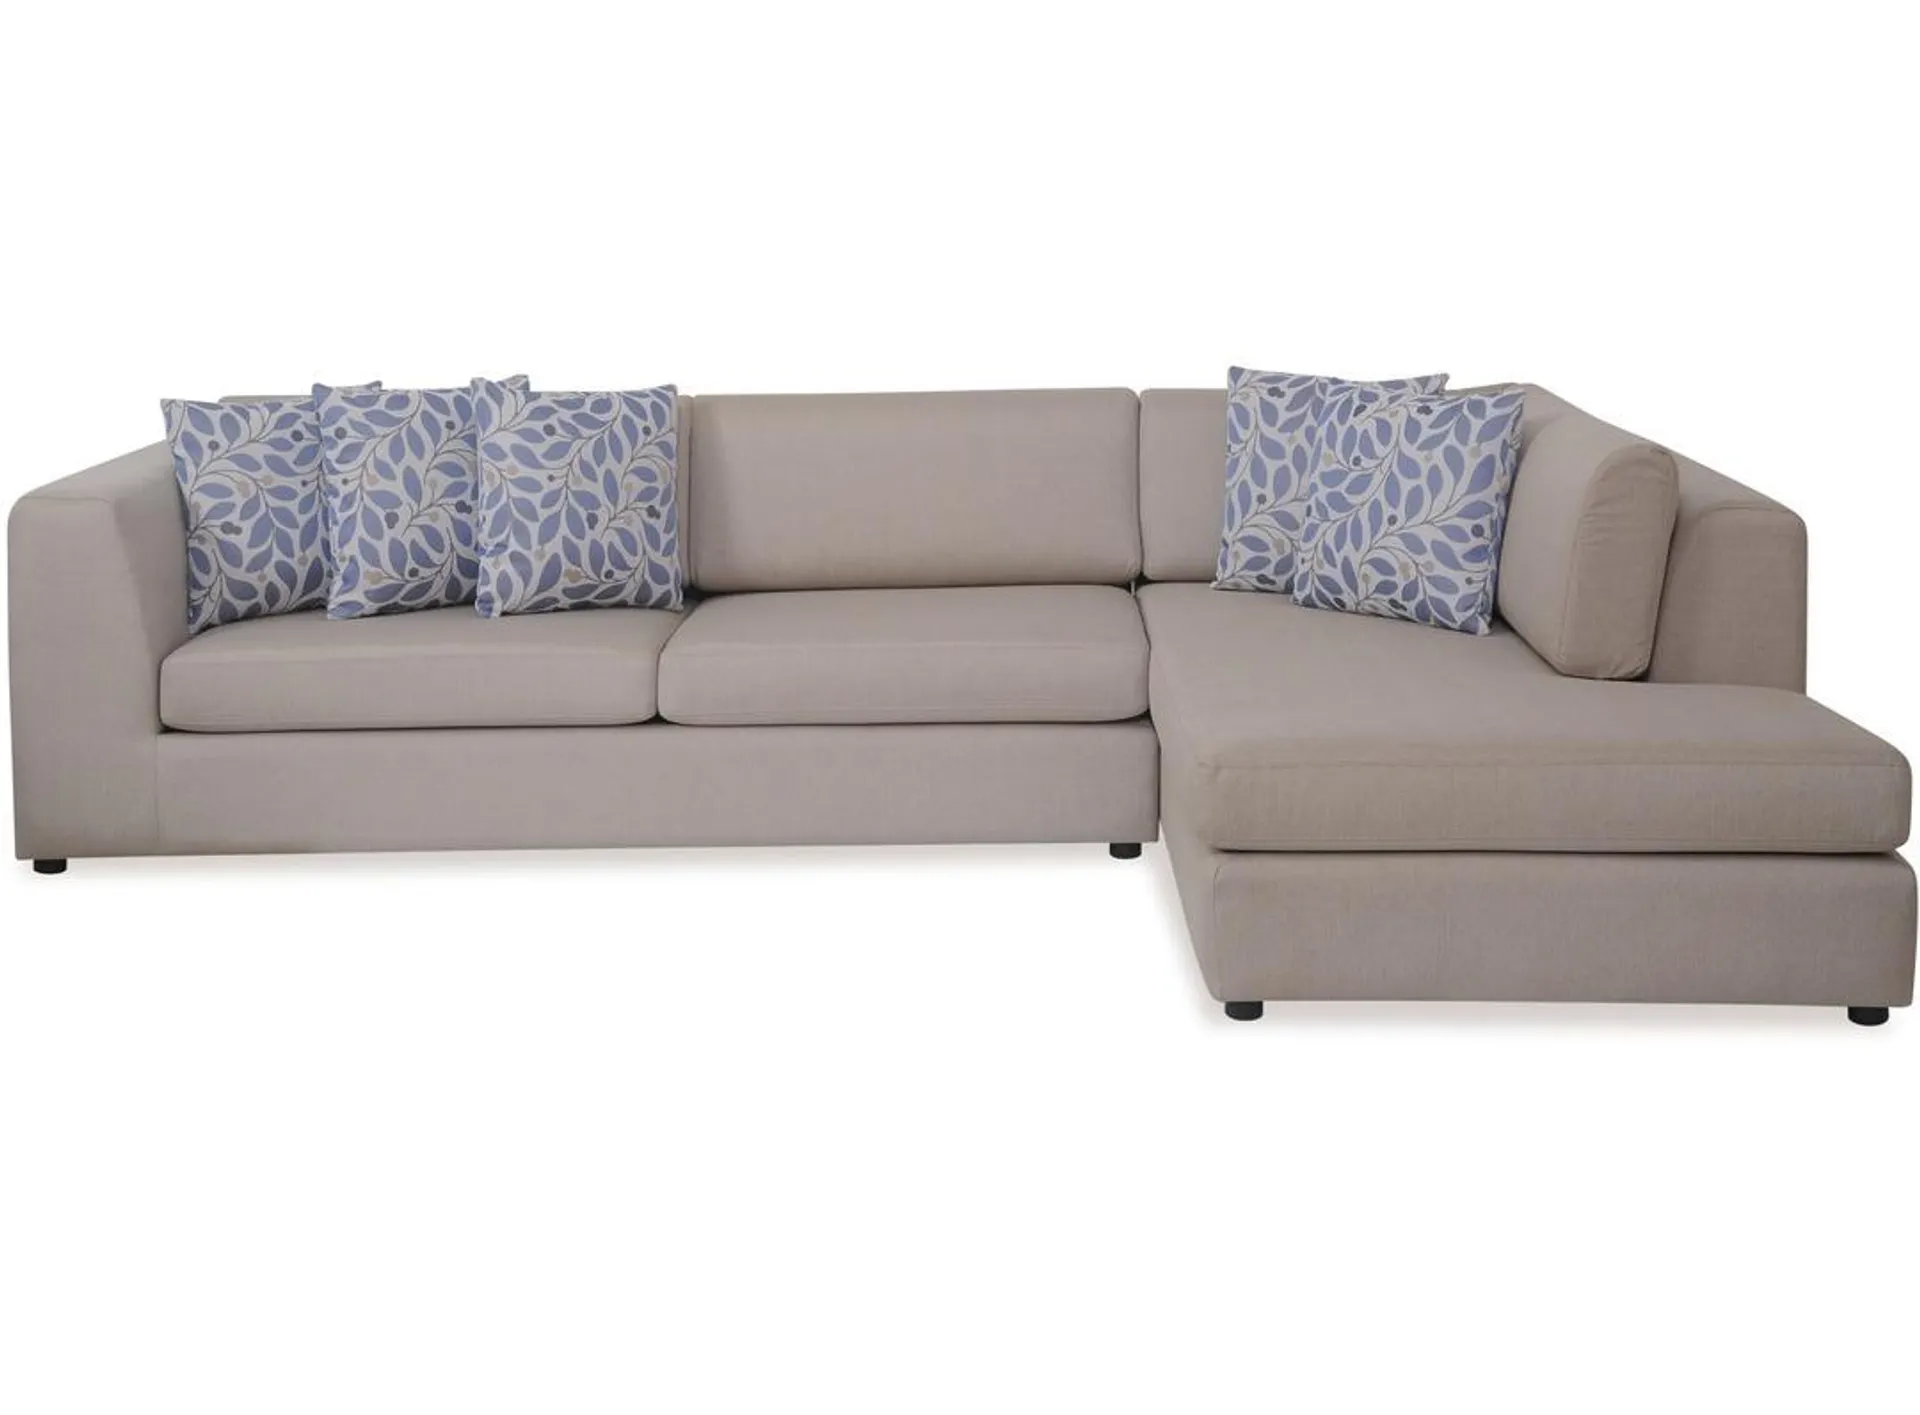 Ollie Modular Chaise 2000 Lounge Suite RHF